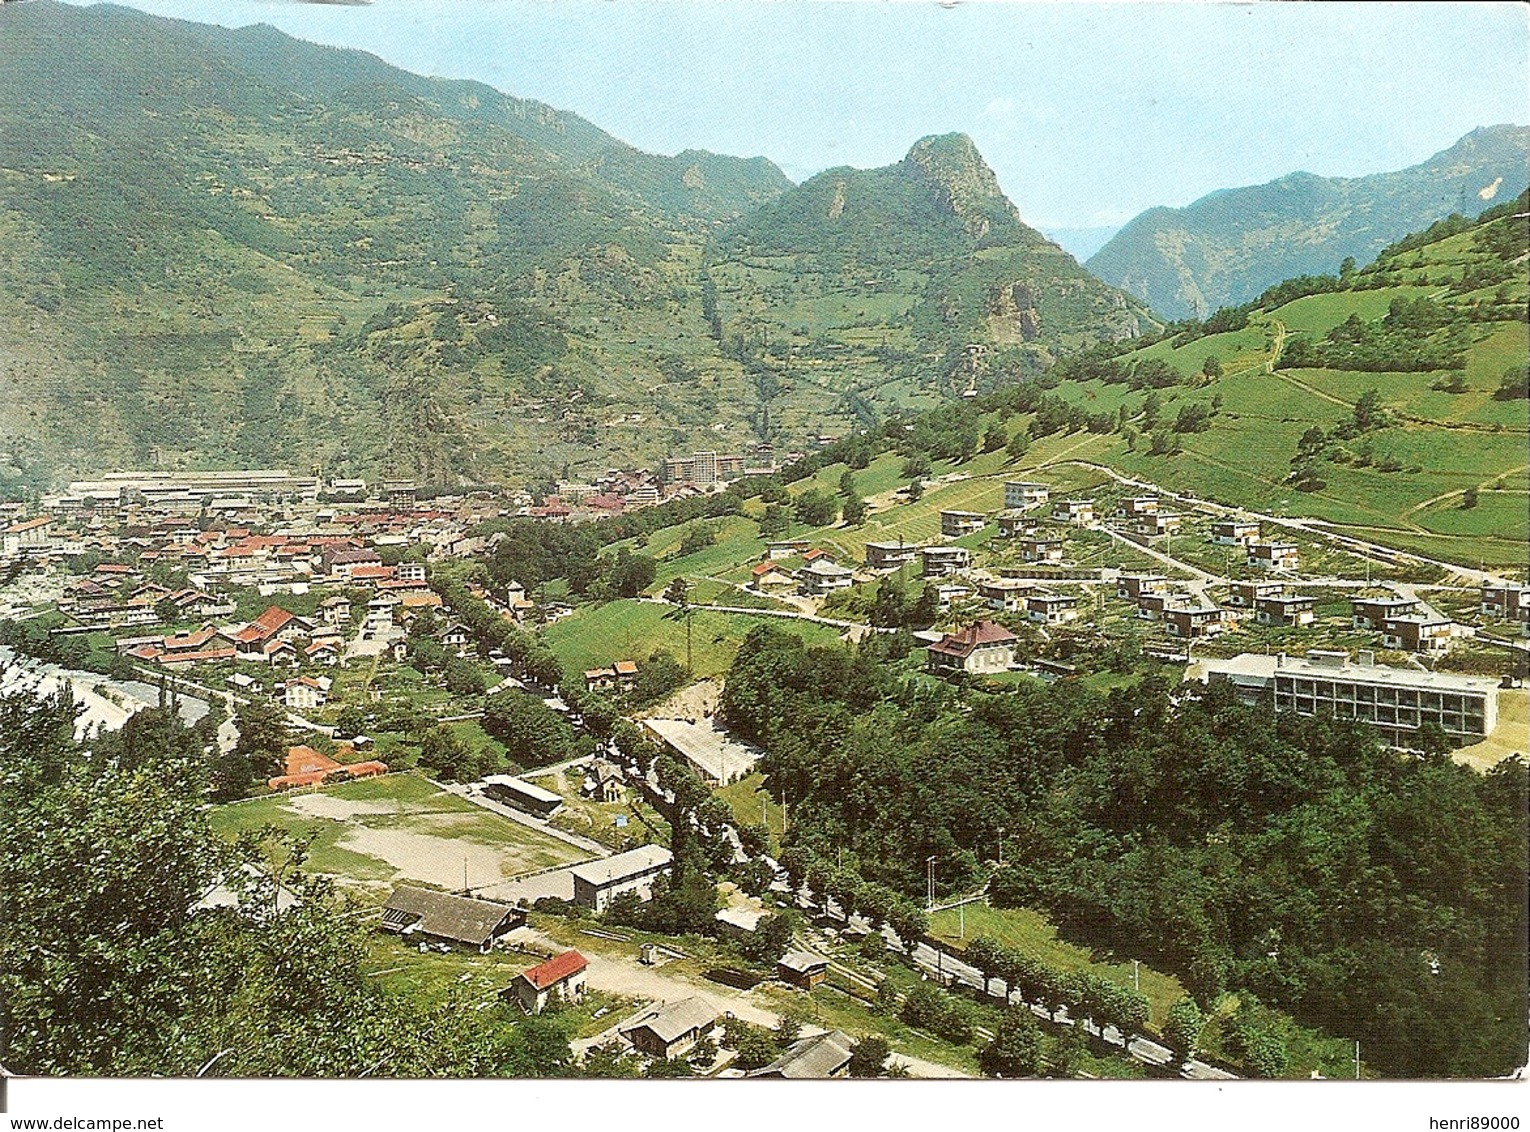 MOUTIERS - Moutiers